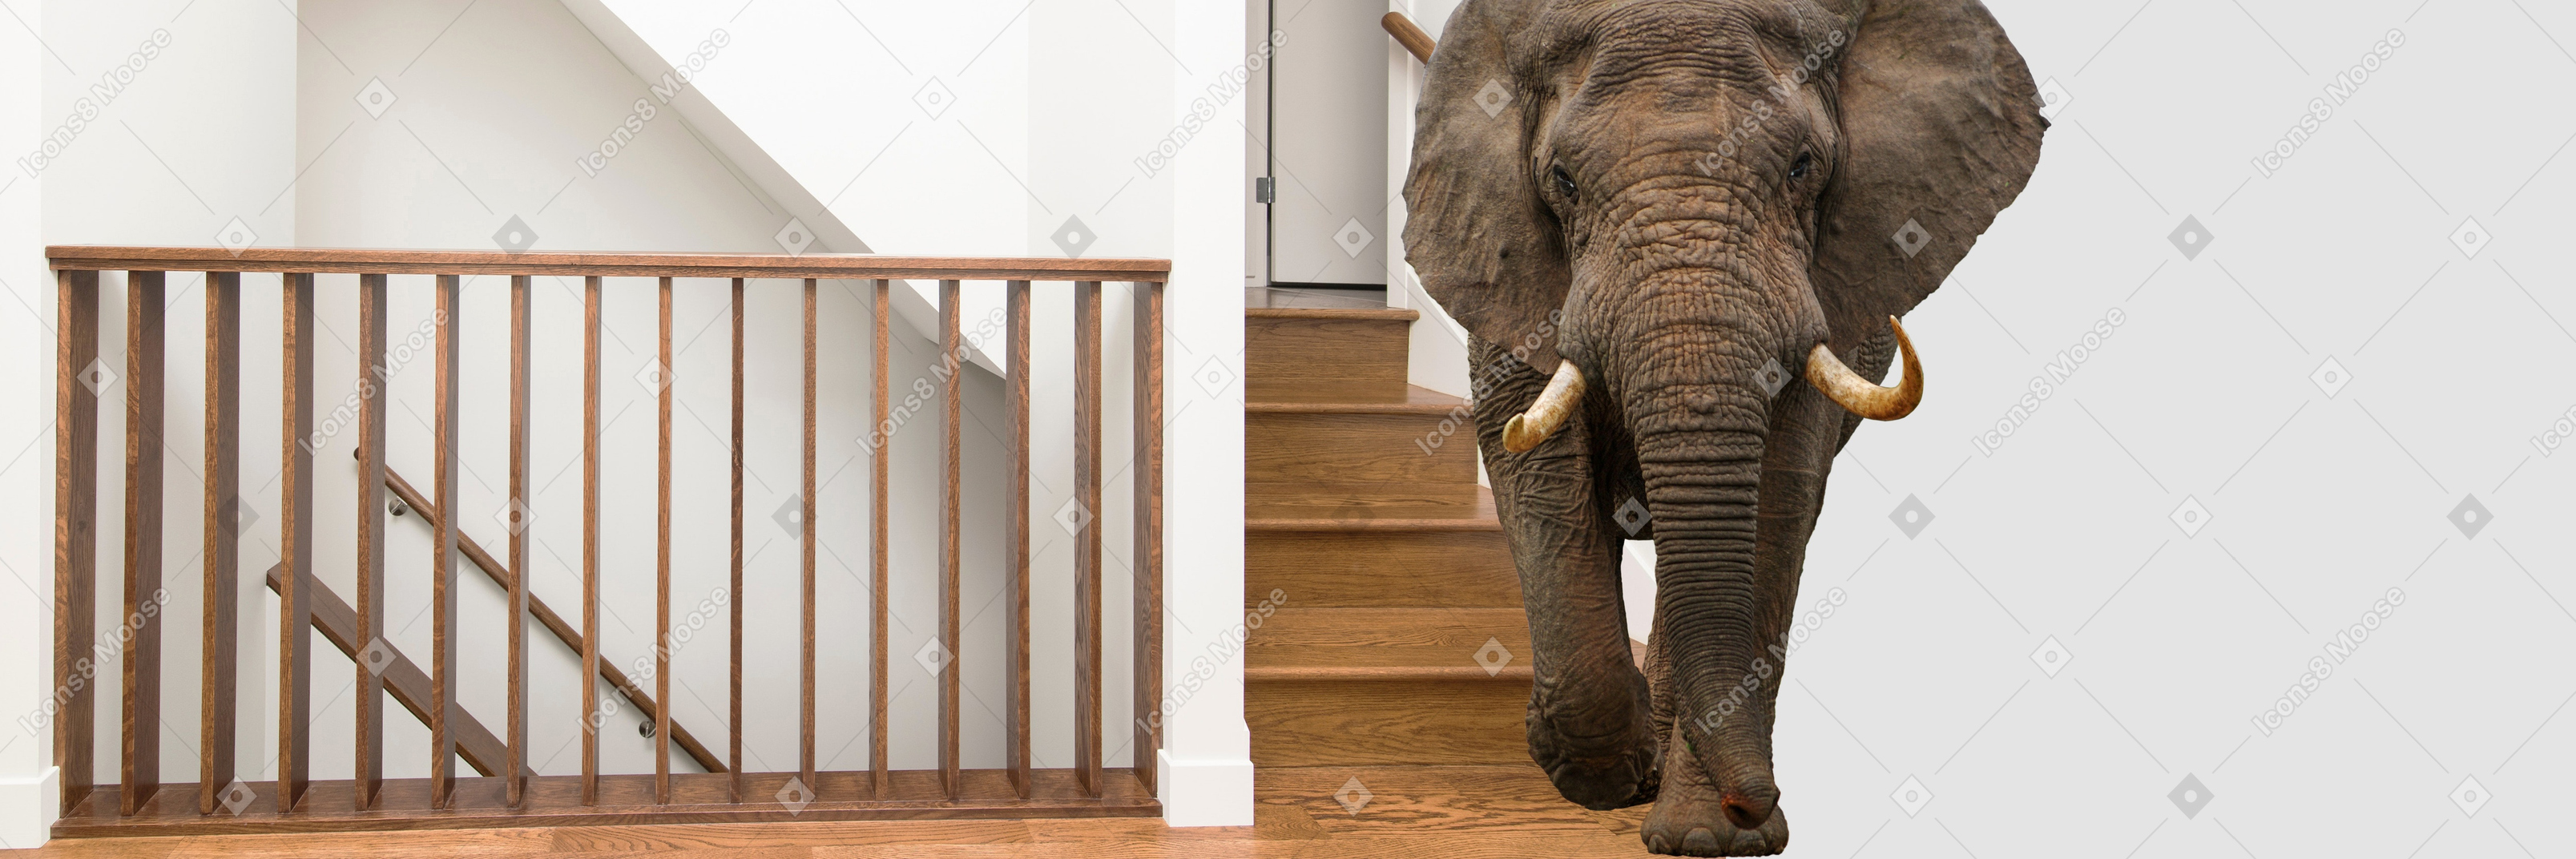 An elephant walking up a flight of stairs